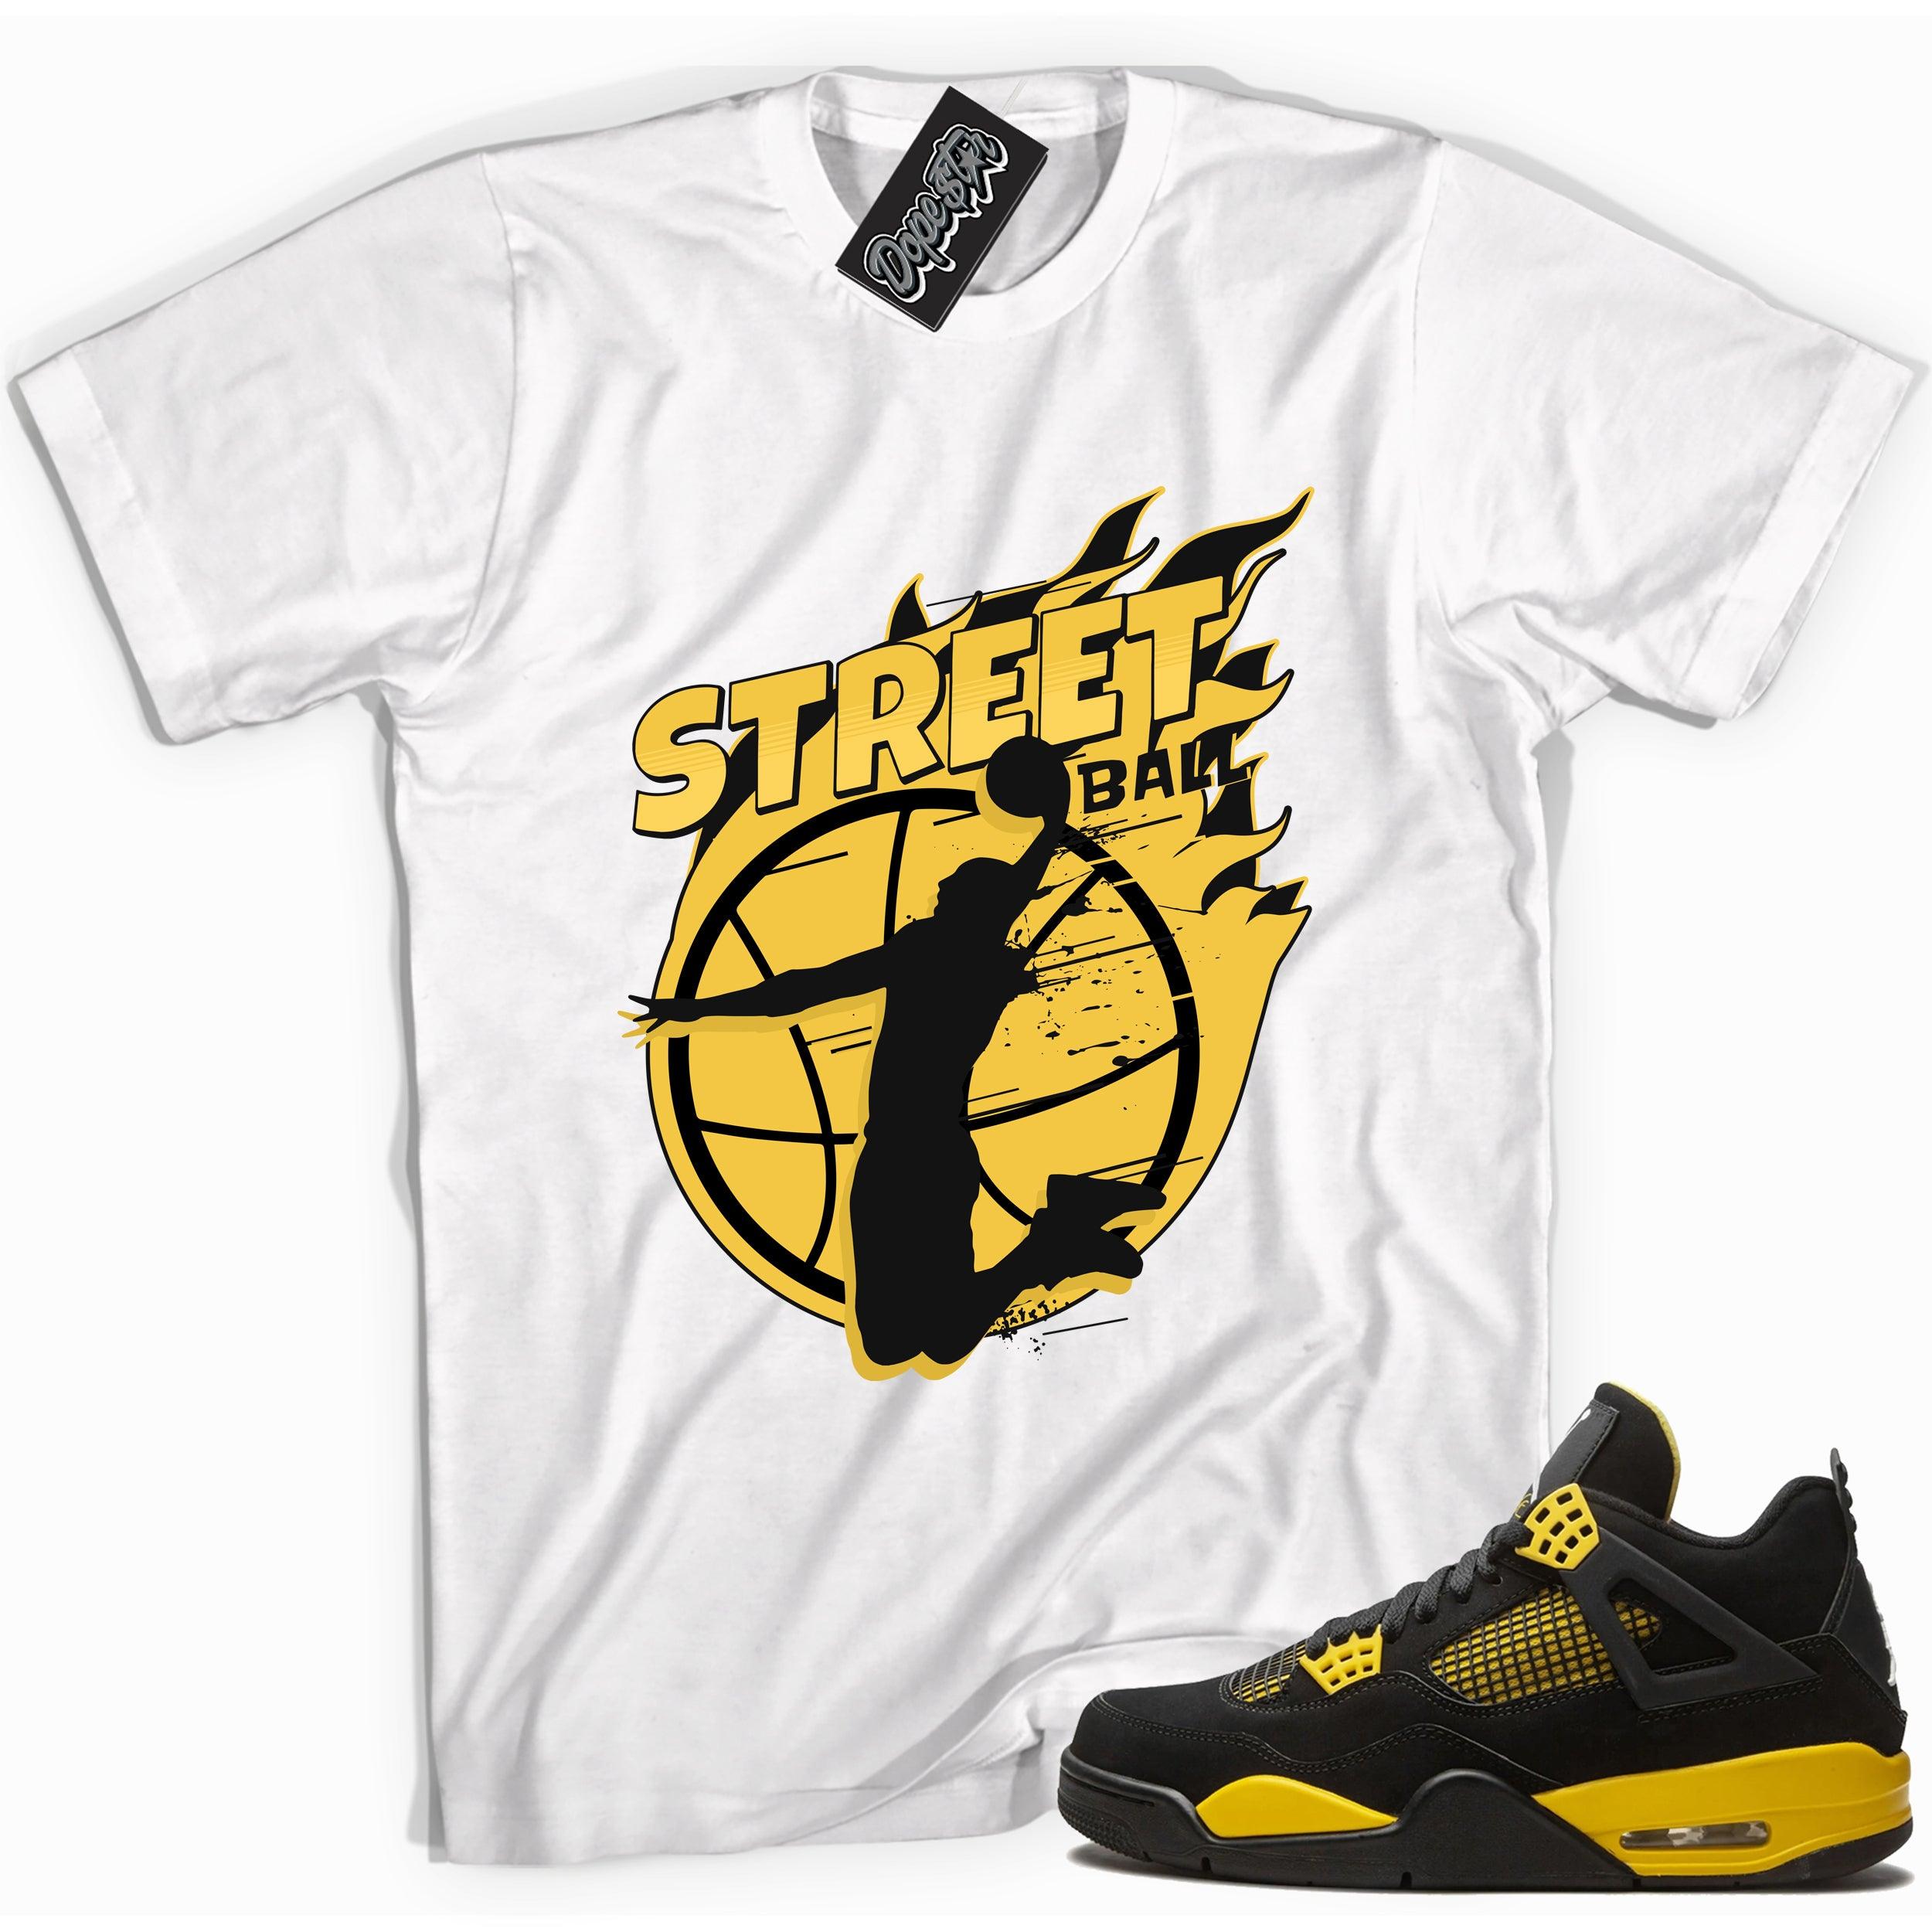 Cool white graphic tee with 'street ball' print, that perfectly matches Air Jordan 4 Thunder sneakers